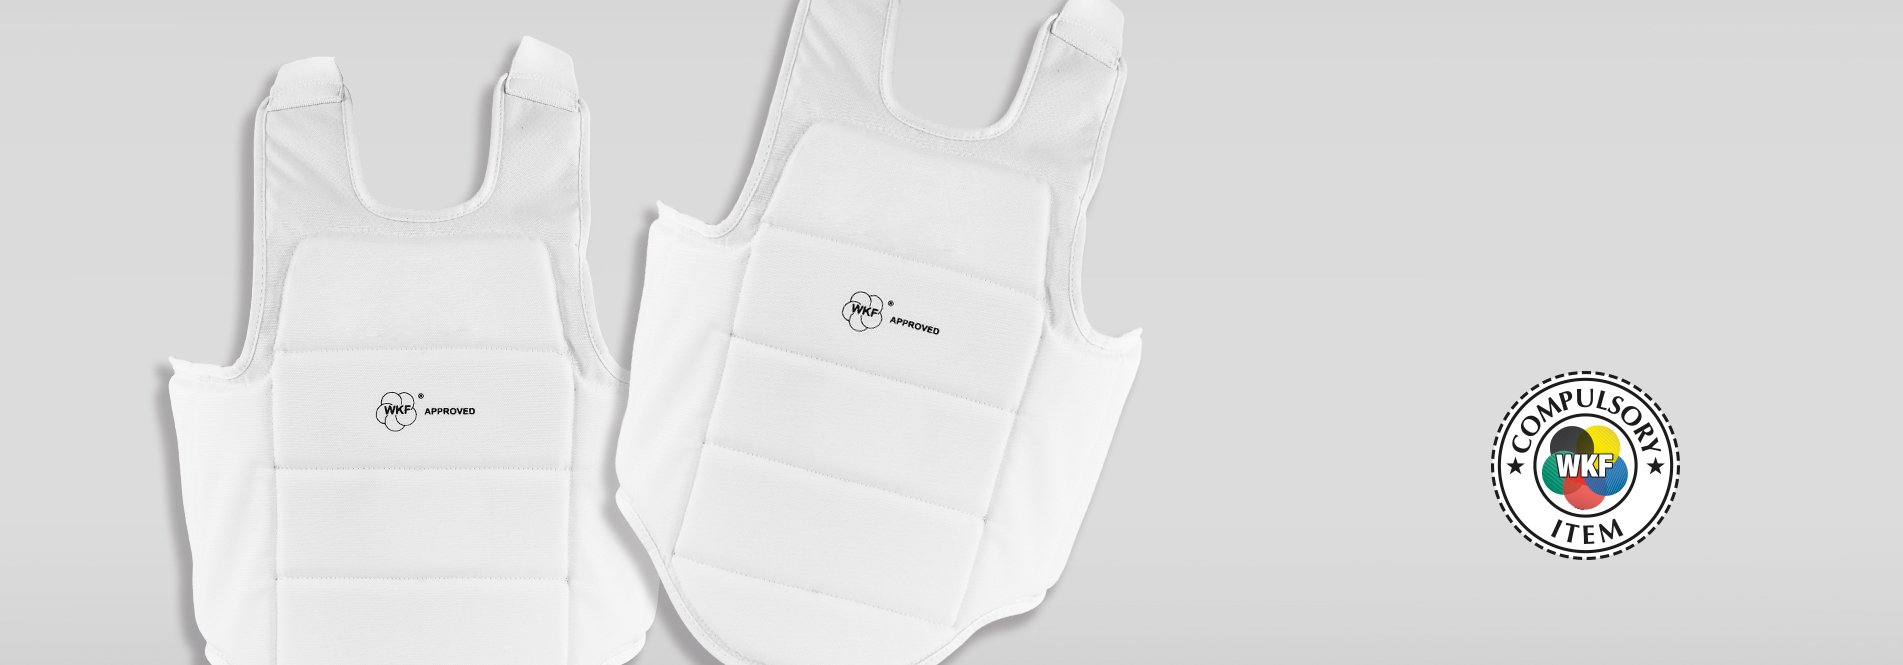 Details about   Karate Chest Protectors Professional Wkf Approved Men Guard For Competition 